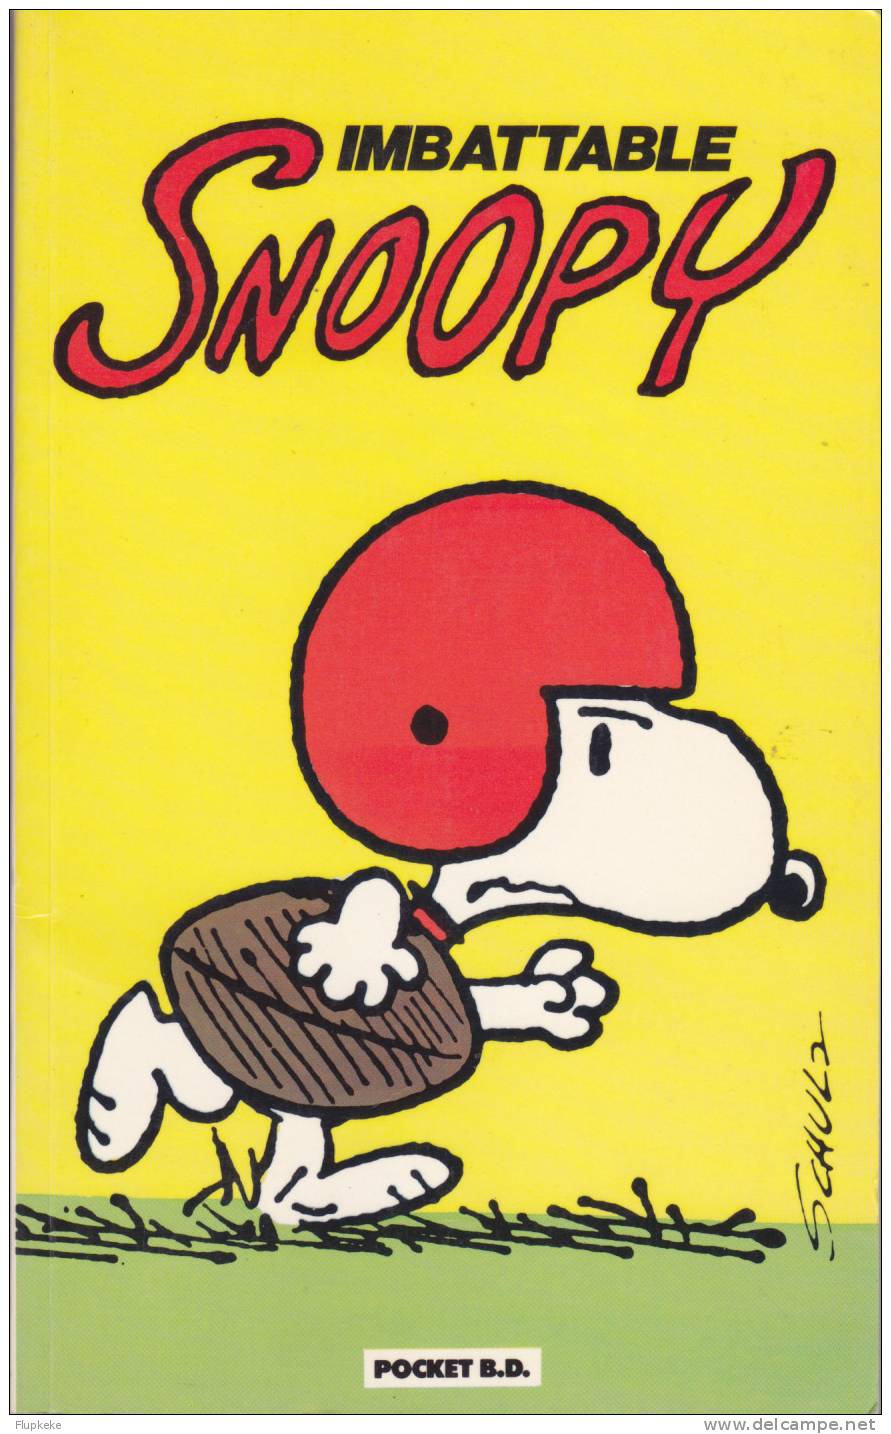 Pocket BD 7046 Imbattable Snoopy Peanuts Charles M. Schulz 1990 - Snoopy